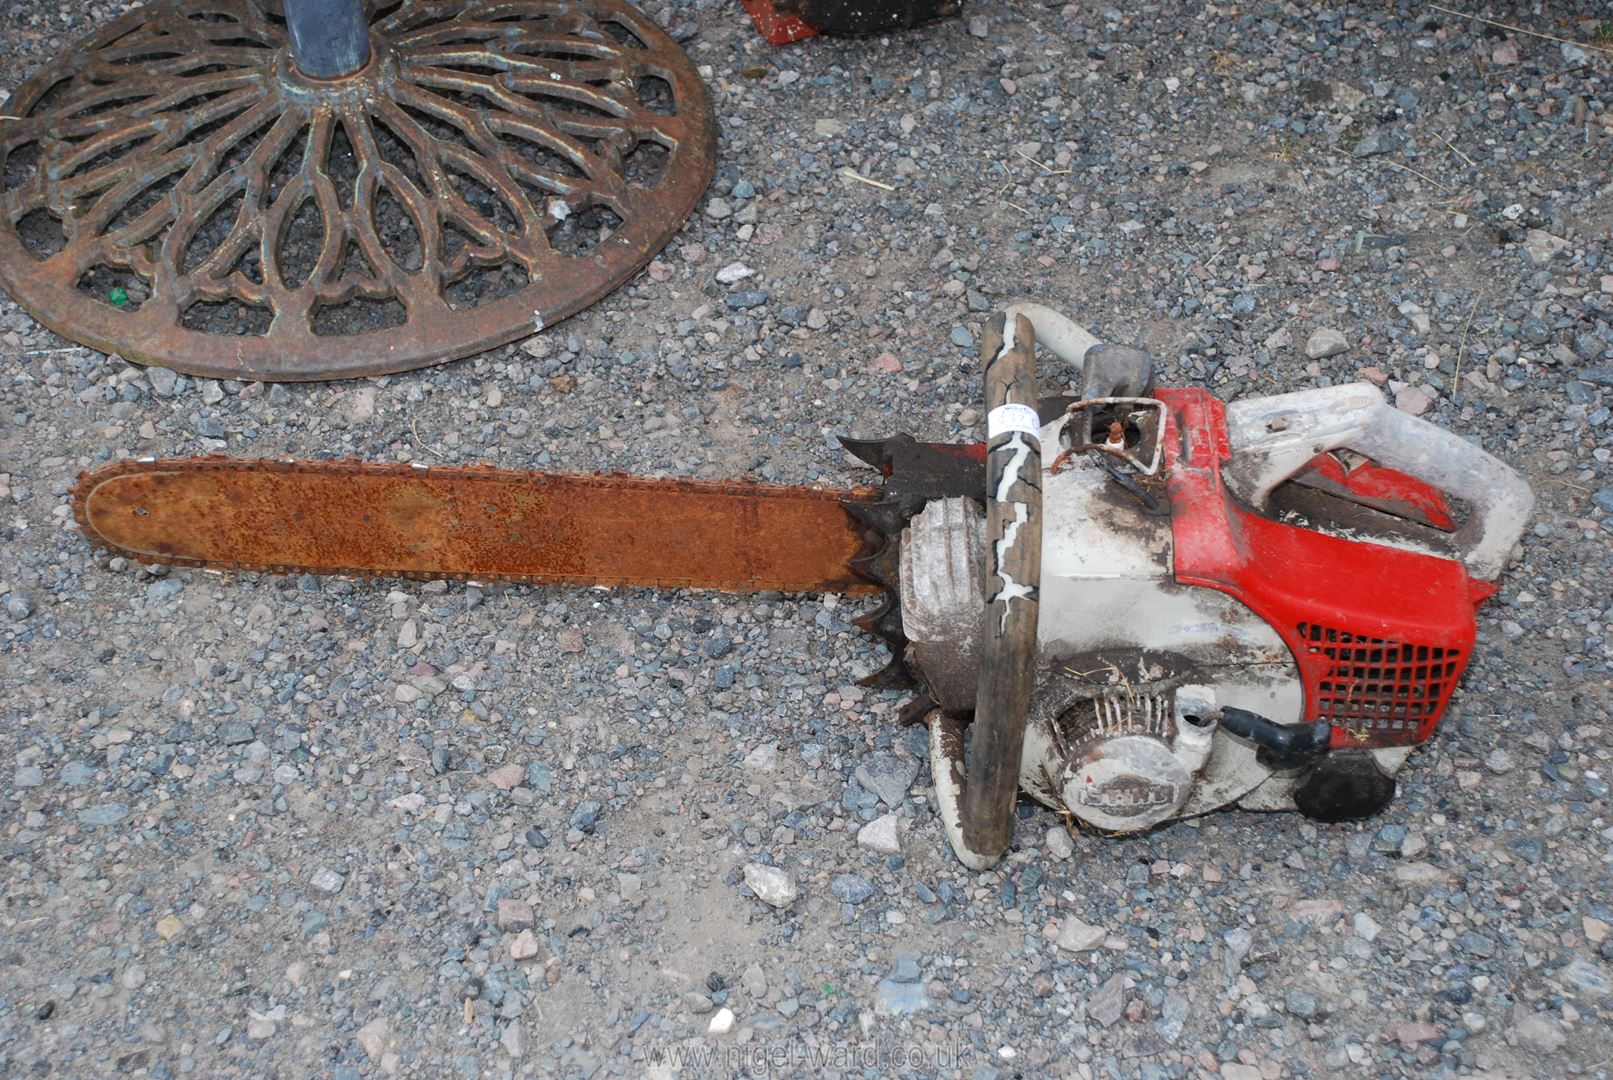 A Stihl chainsaw for restoration, no chain brake (unable to start as no fuel present).